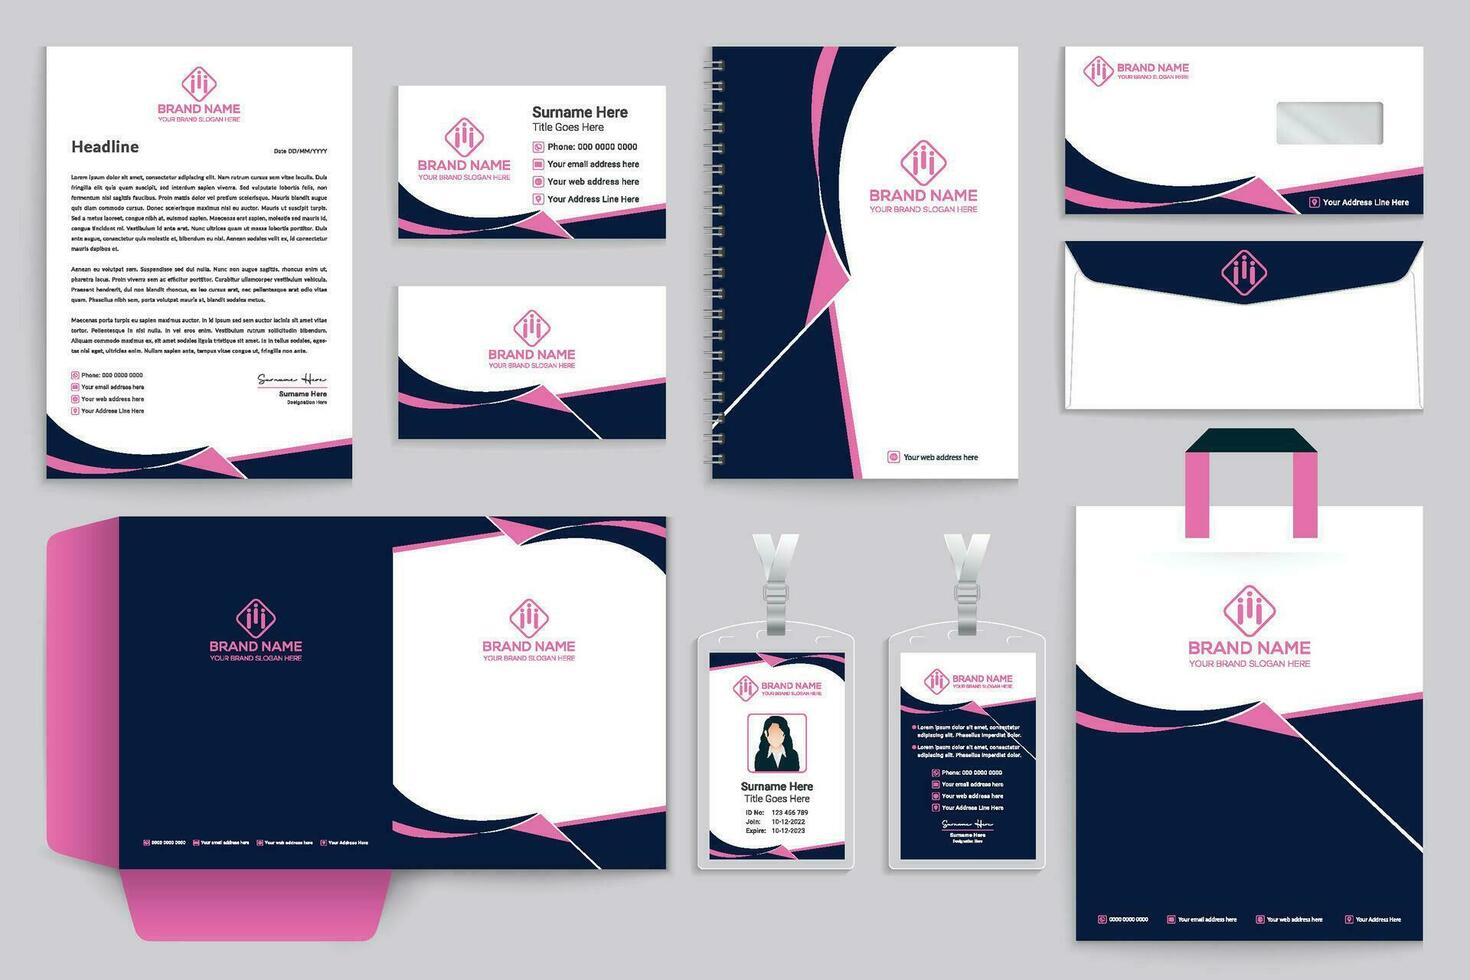 Corporate stationery template design template vector